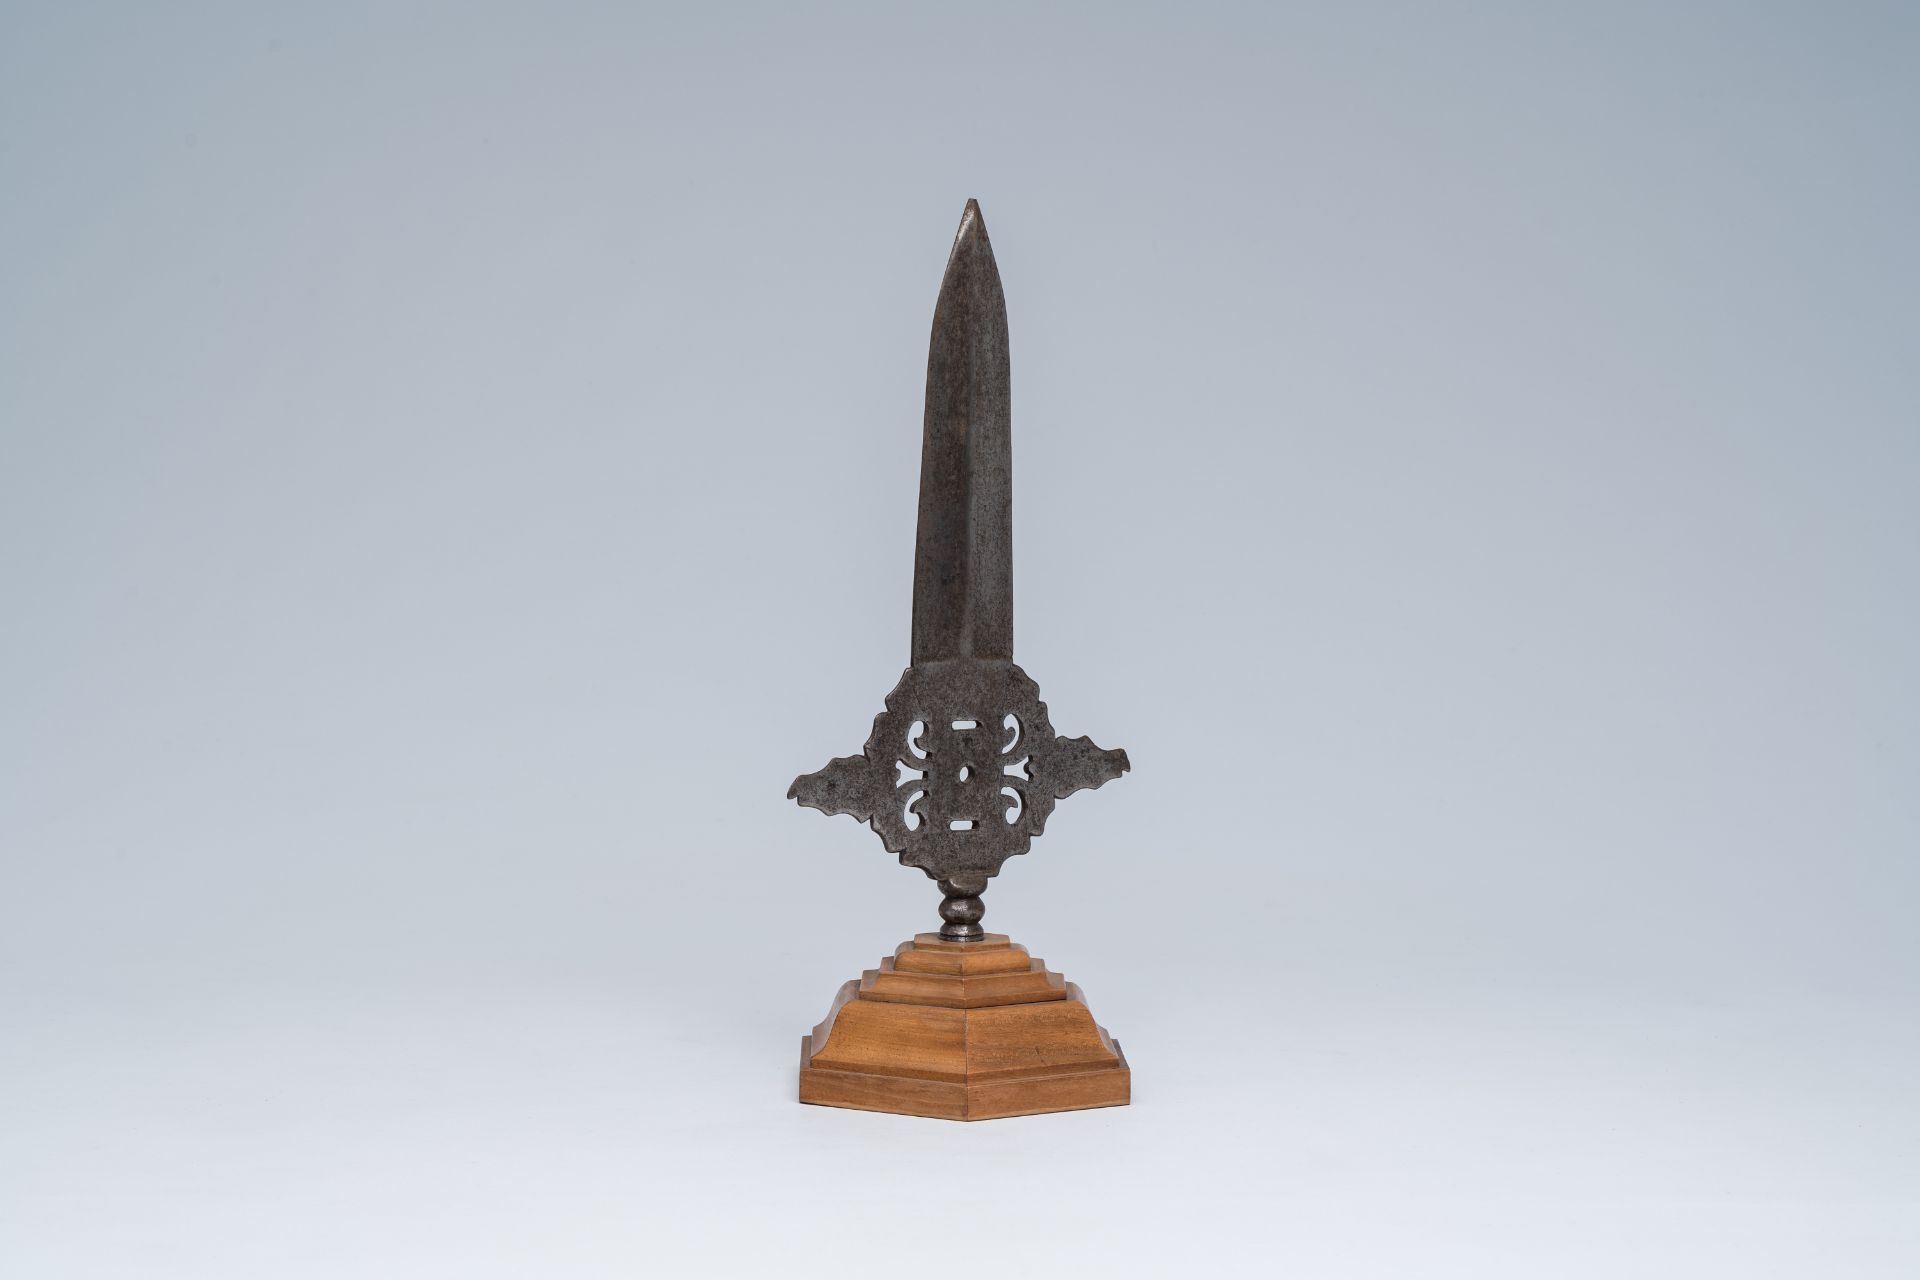 An open worked wrought iron spearhead on a wood stand, 19th C. or earlier